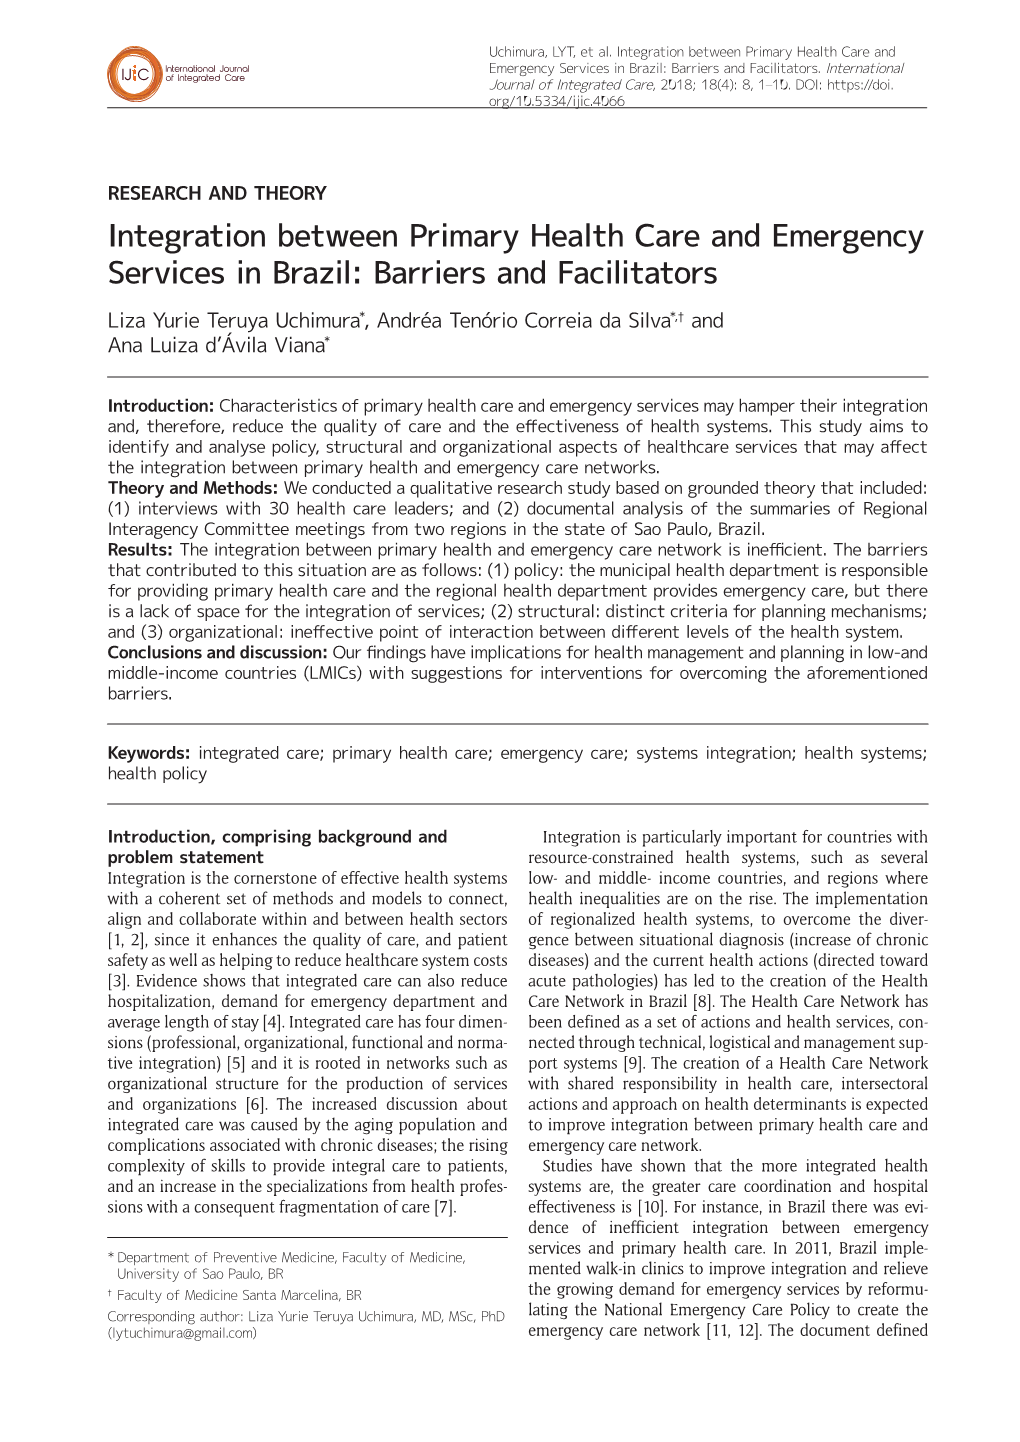 Integration Between Primary Health Care and Emergency Services in Brazil: Barriers and Facilitators